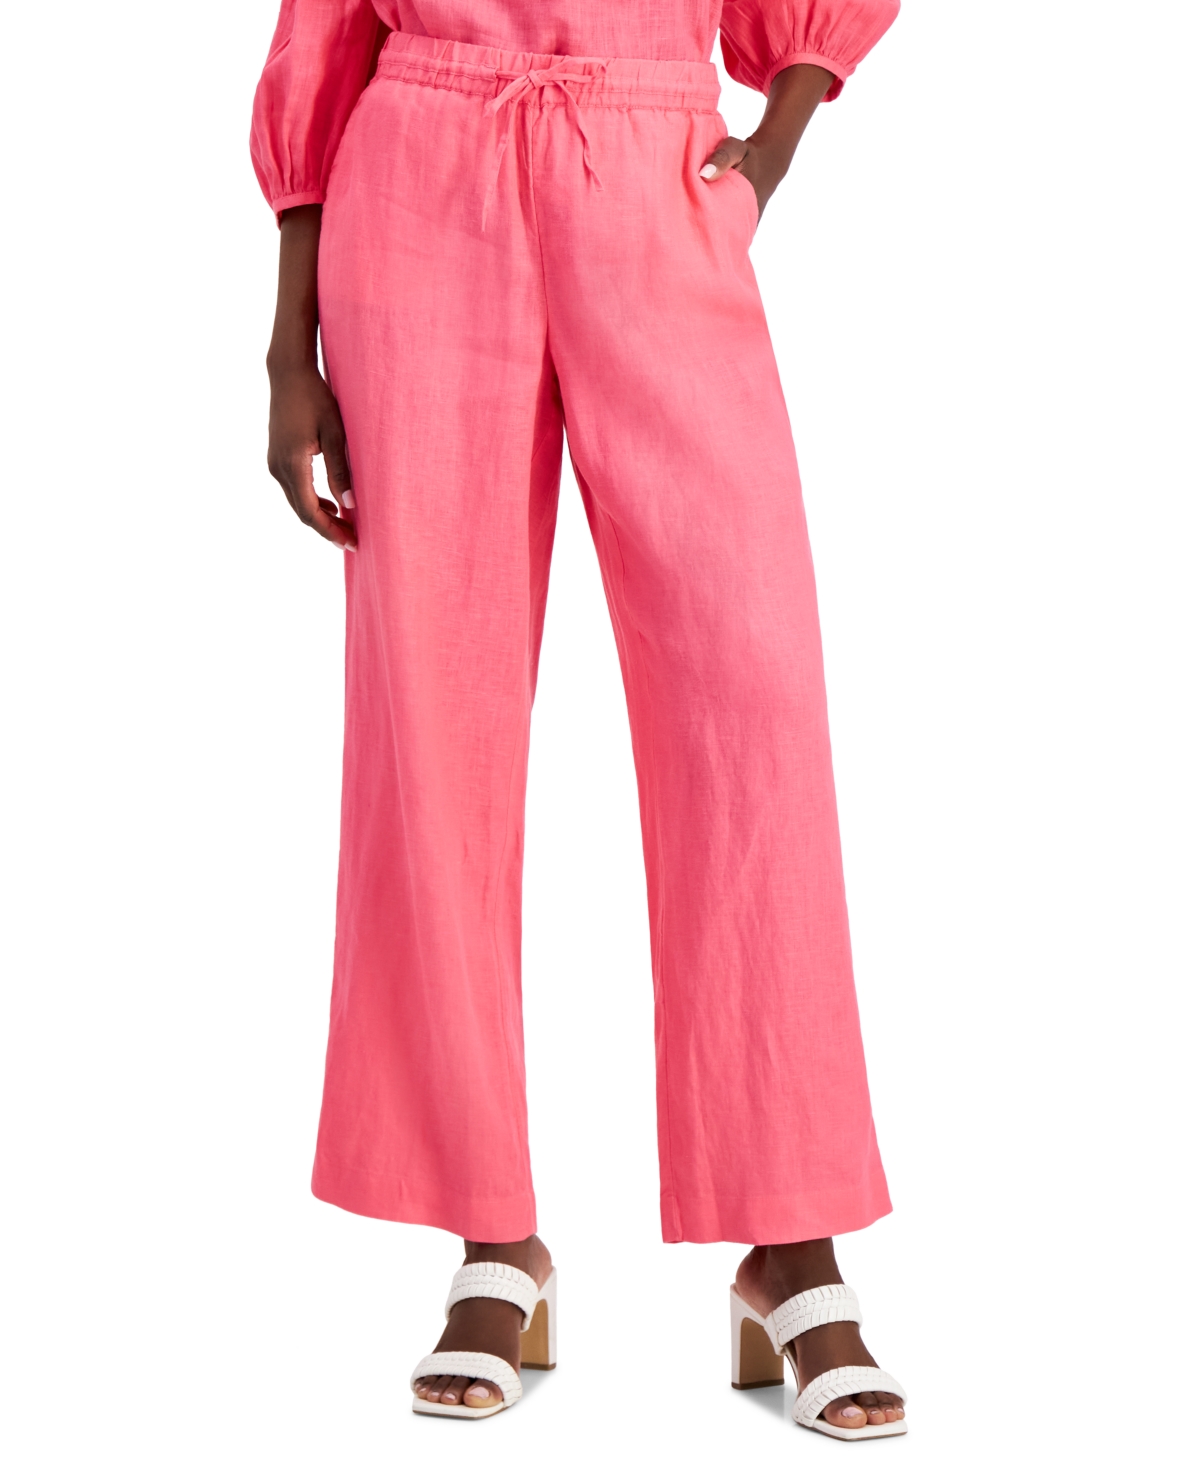 Linen Drawstring-Waist Pants, Created for Macy's - Foxy Pink